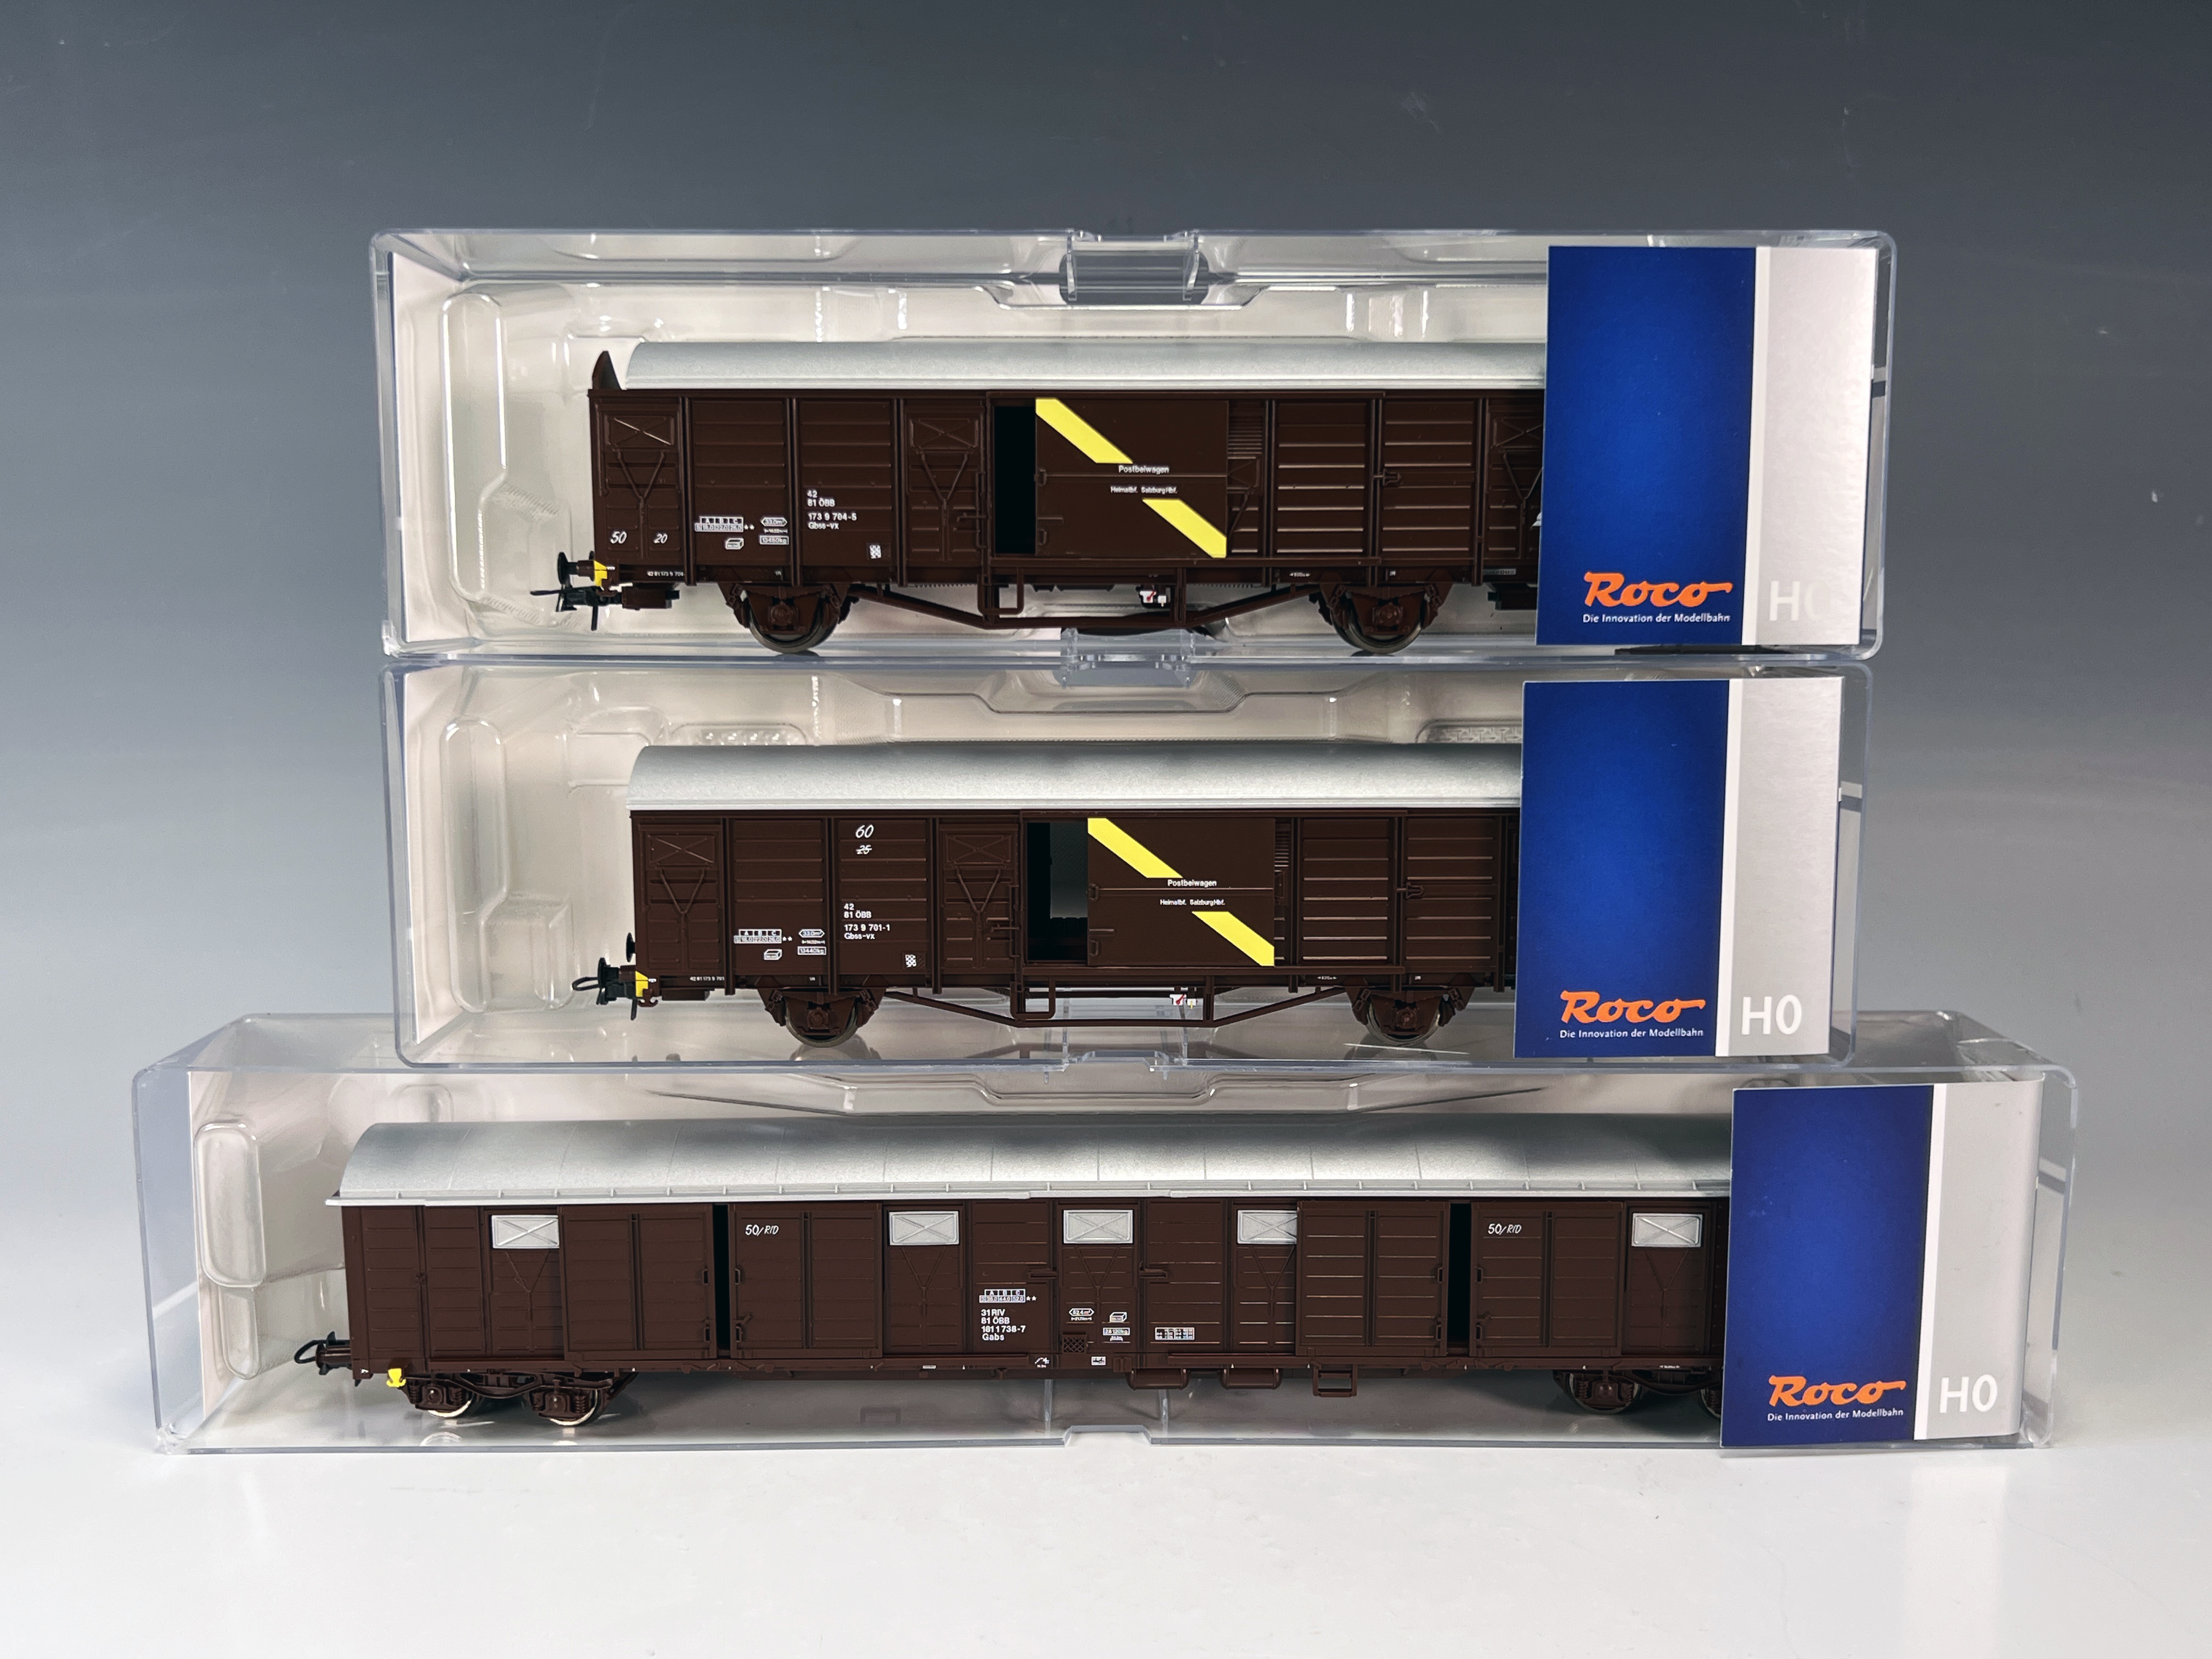 Roco Ho Boxcar Trains In Package image 1